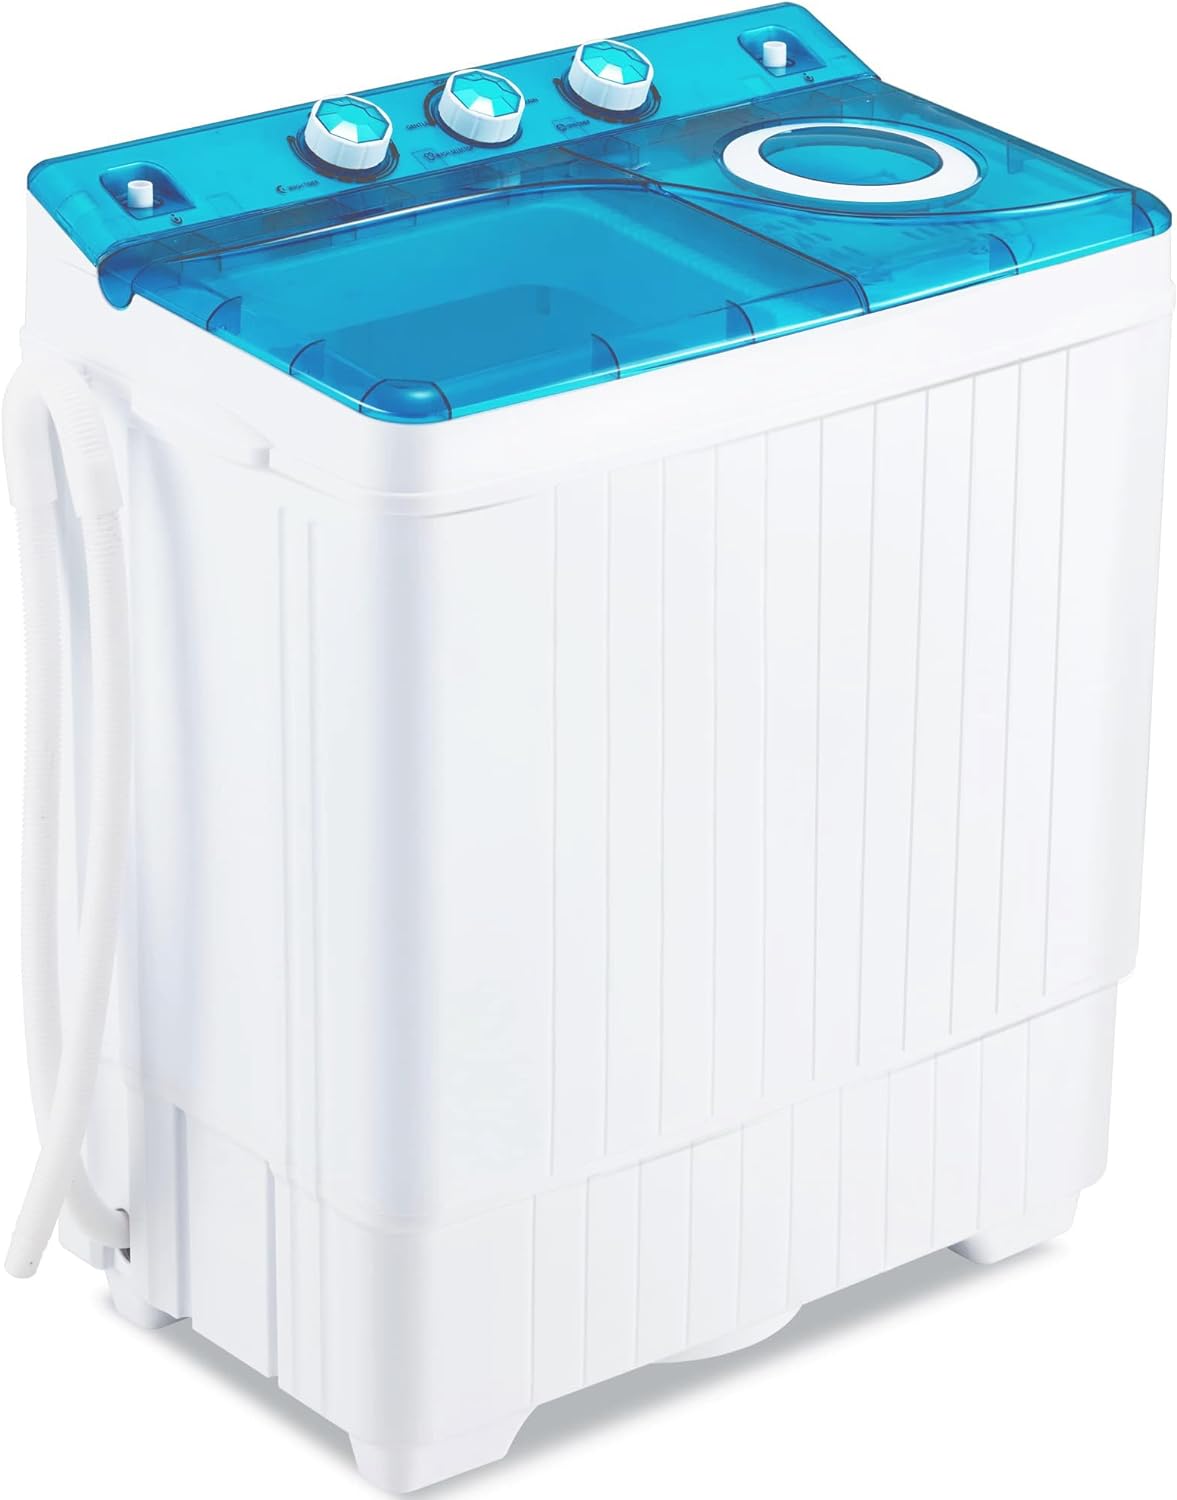 Portable Washing machine 26Lbs Capacity Mini Washer and Dryer Combo Compact Twin Tub Laundry Washer(18Lbs) & Spinner(8Lbs) with Built-in Gravity Drain,Low Noise for Apartment,Dorms,RV Camping, BLUE